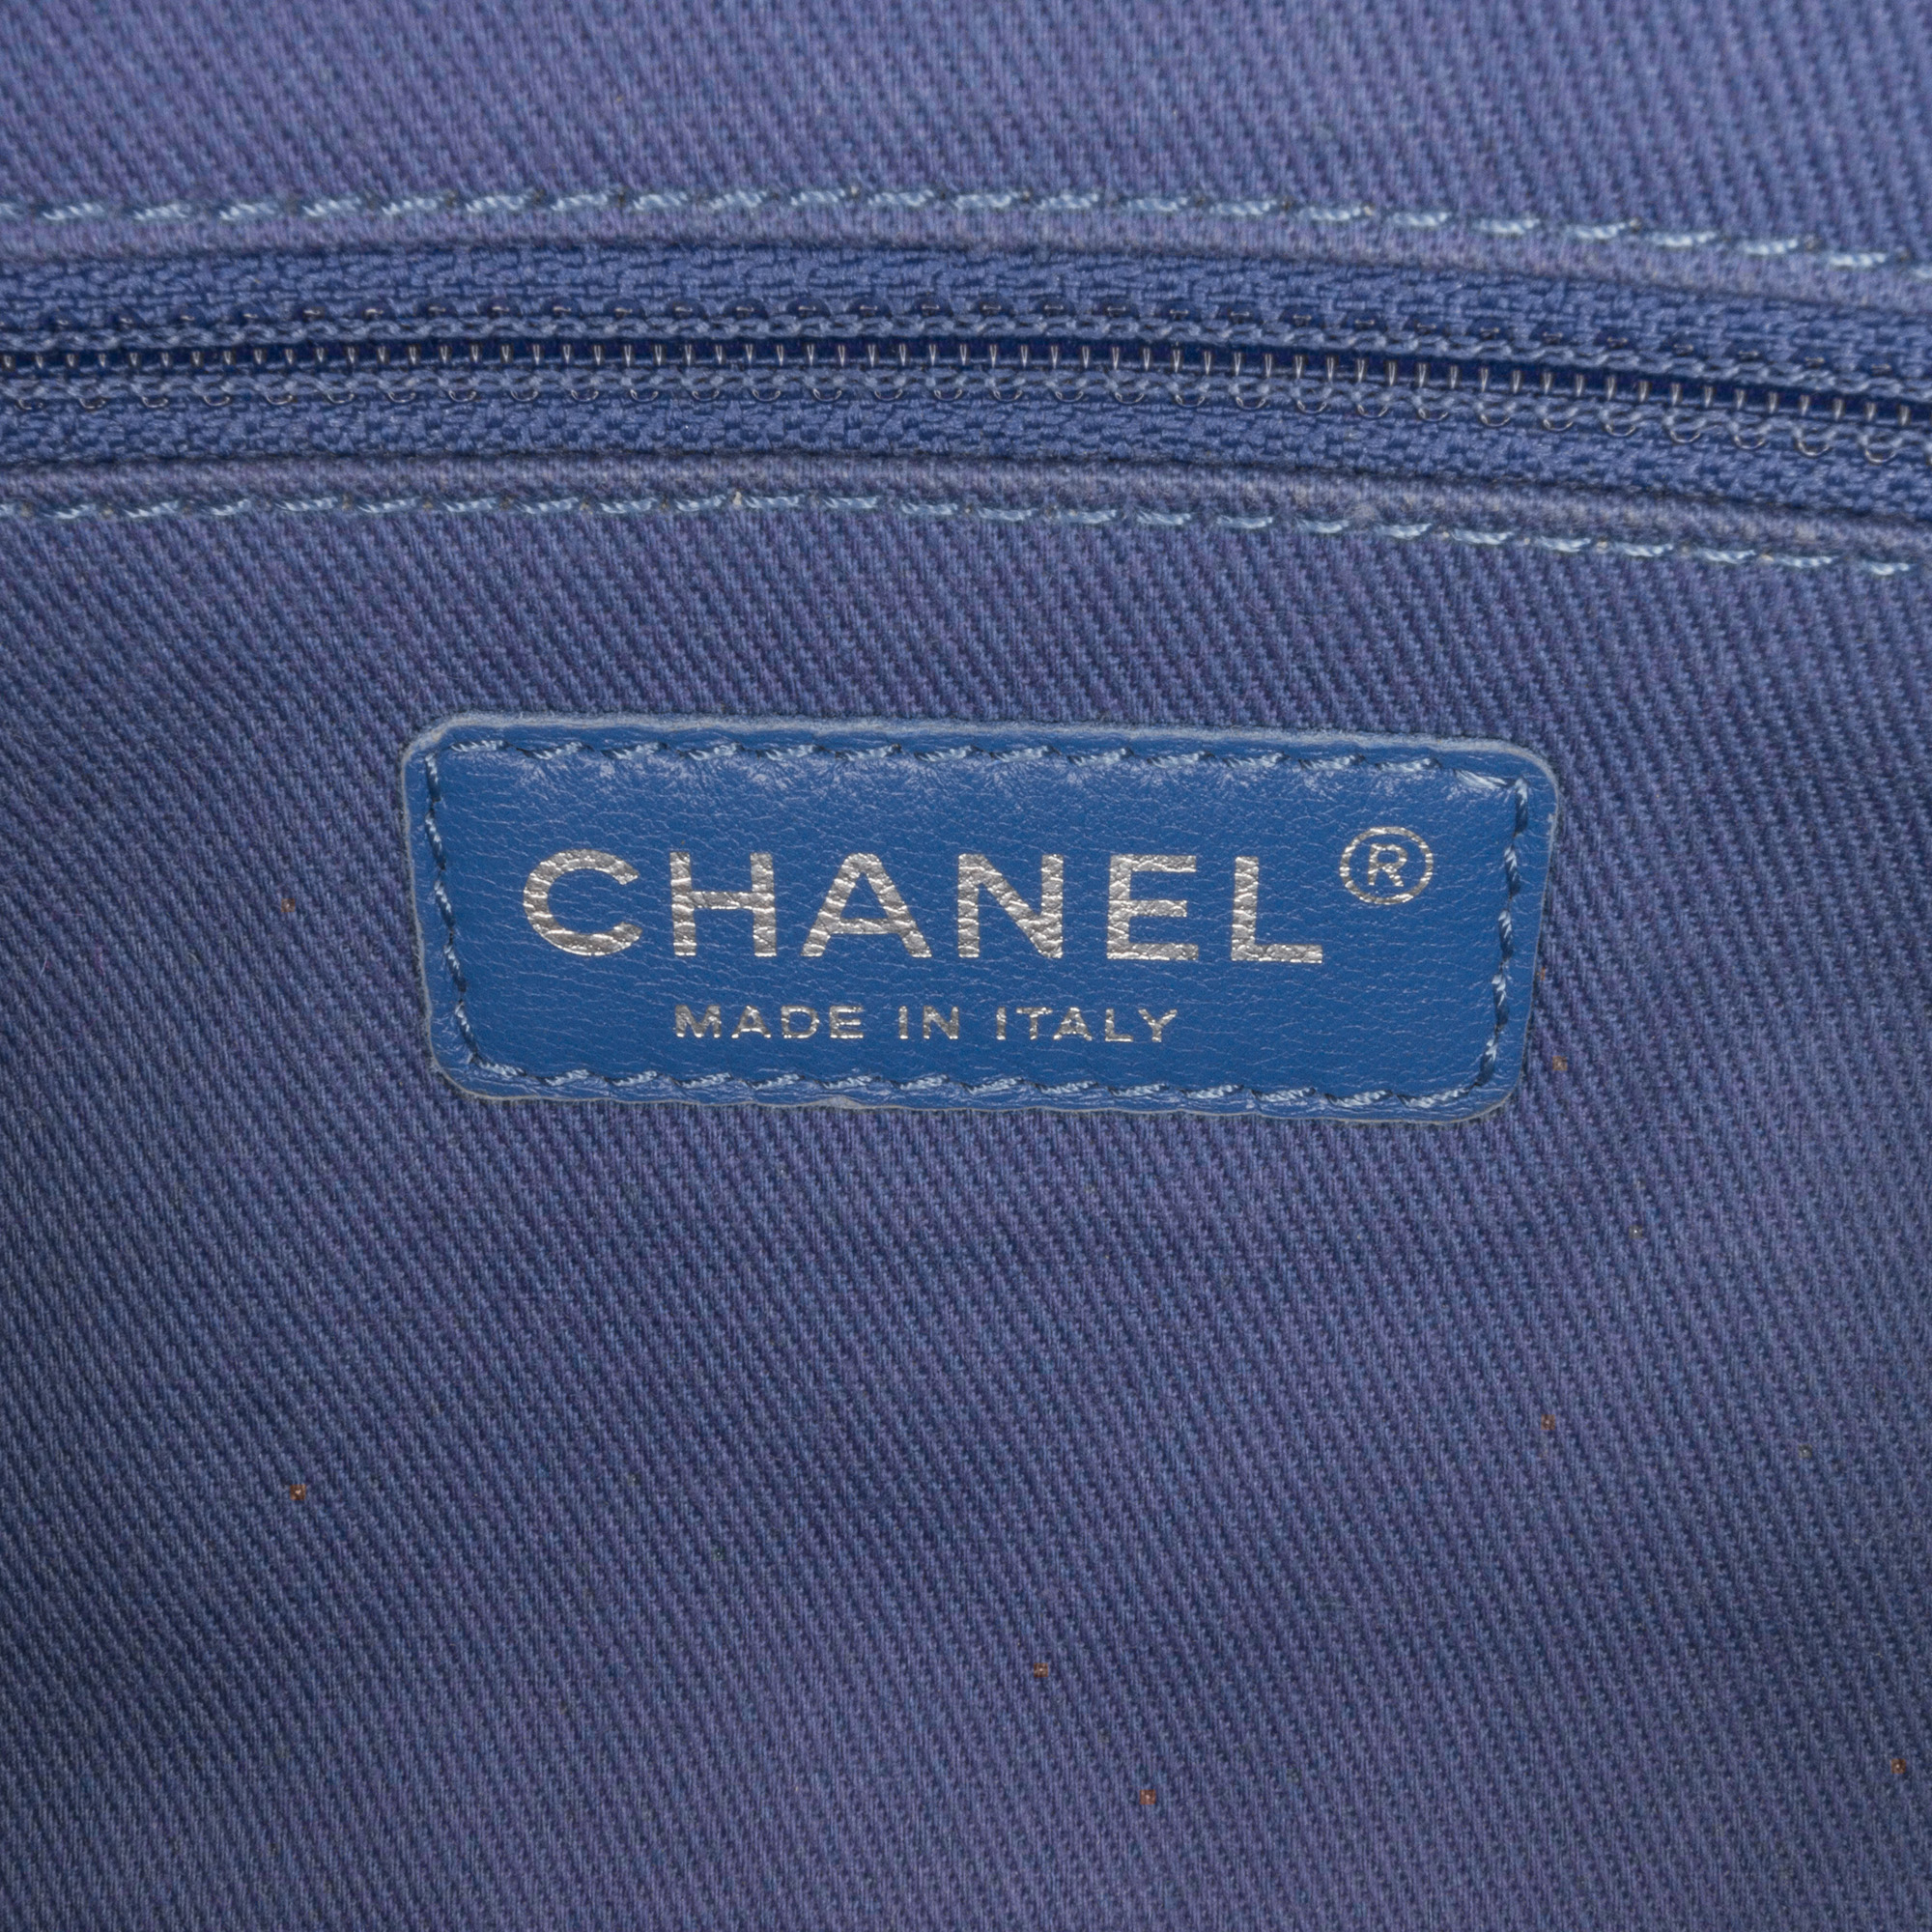 Chanel Blue Medium Up In The Air Flap